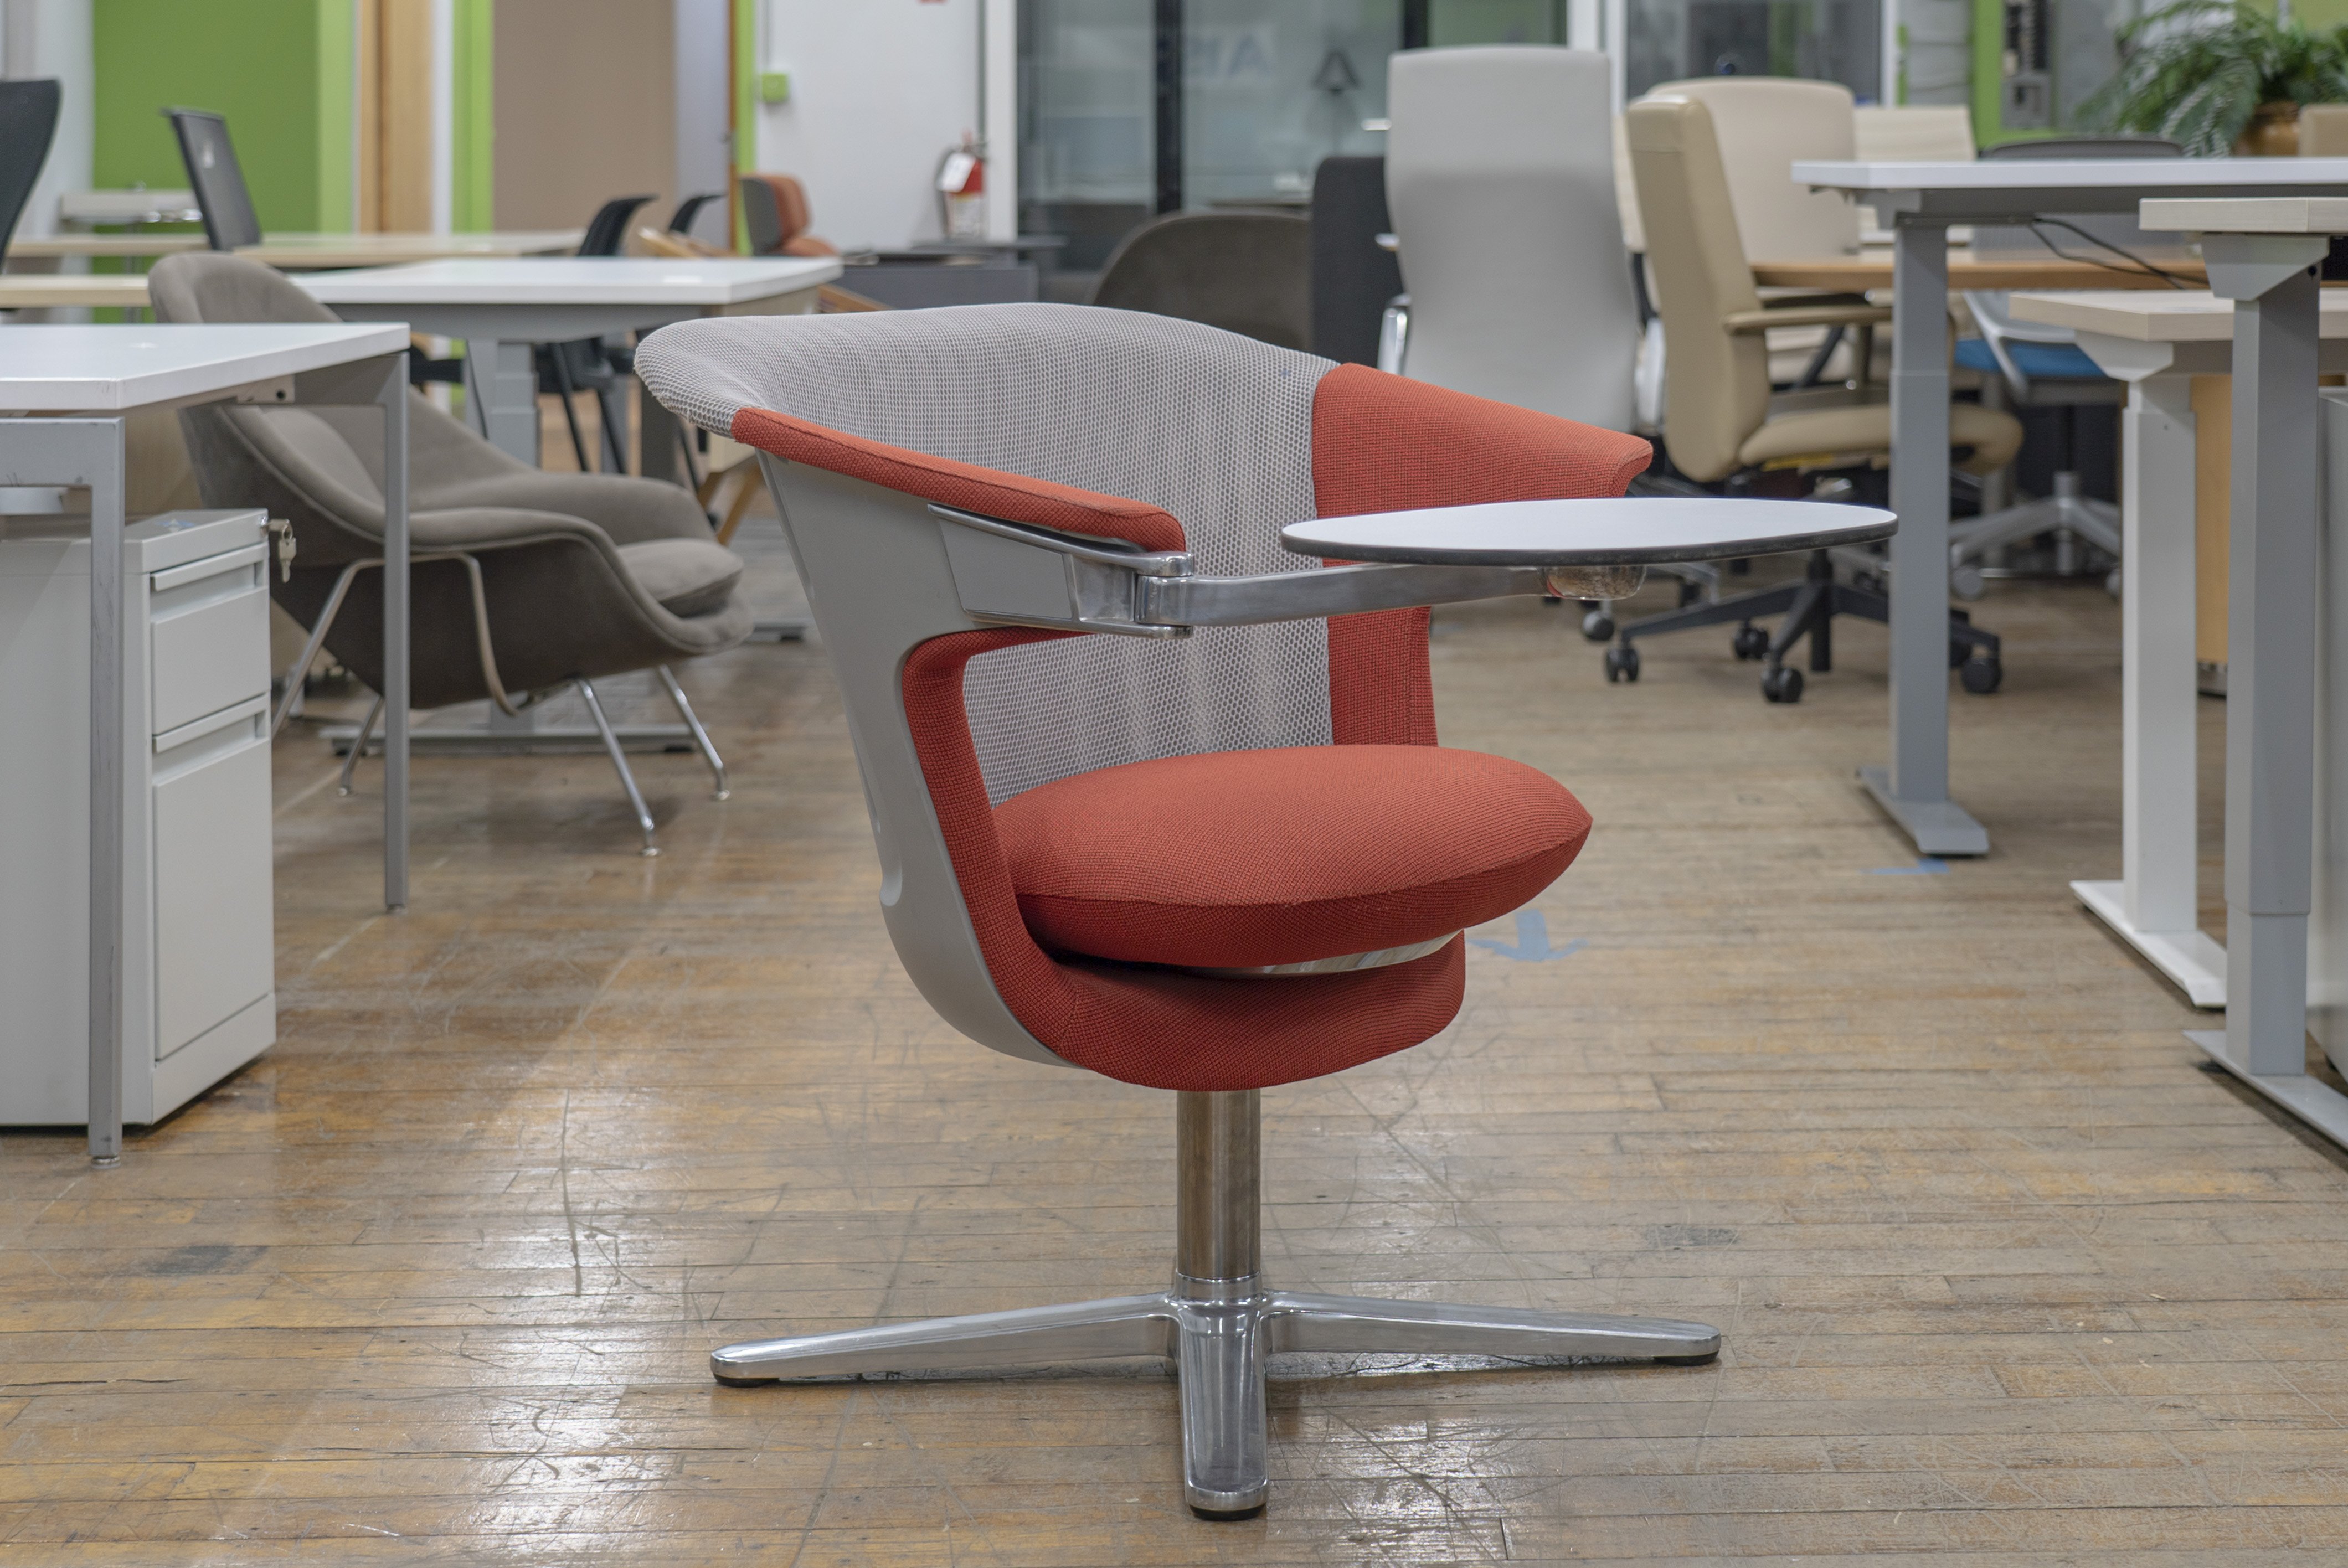 steelcase-i2i-swivel-lounge-chairs-with-tablet